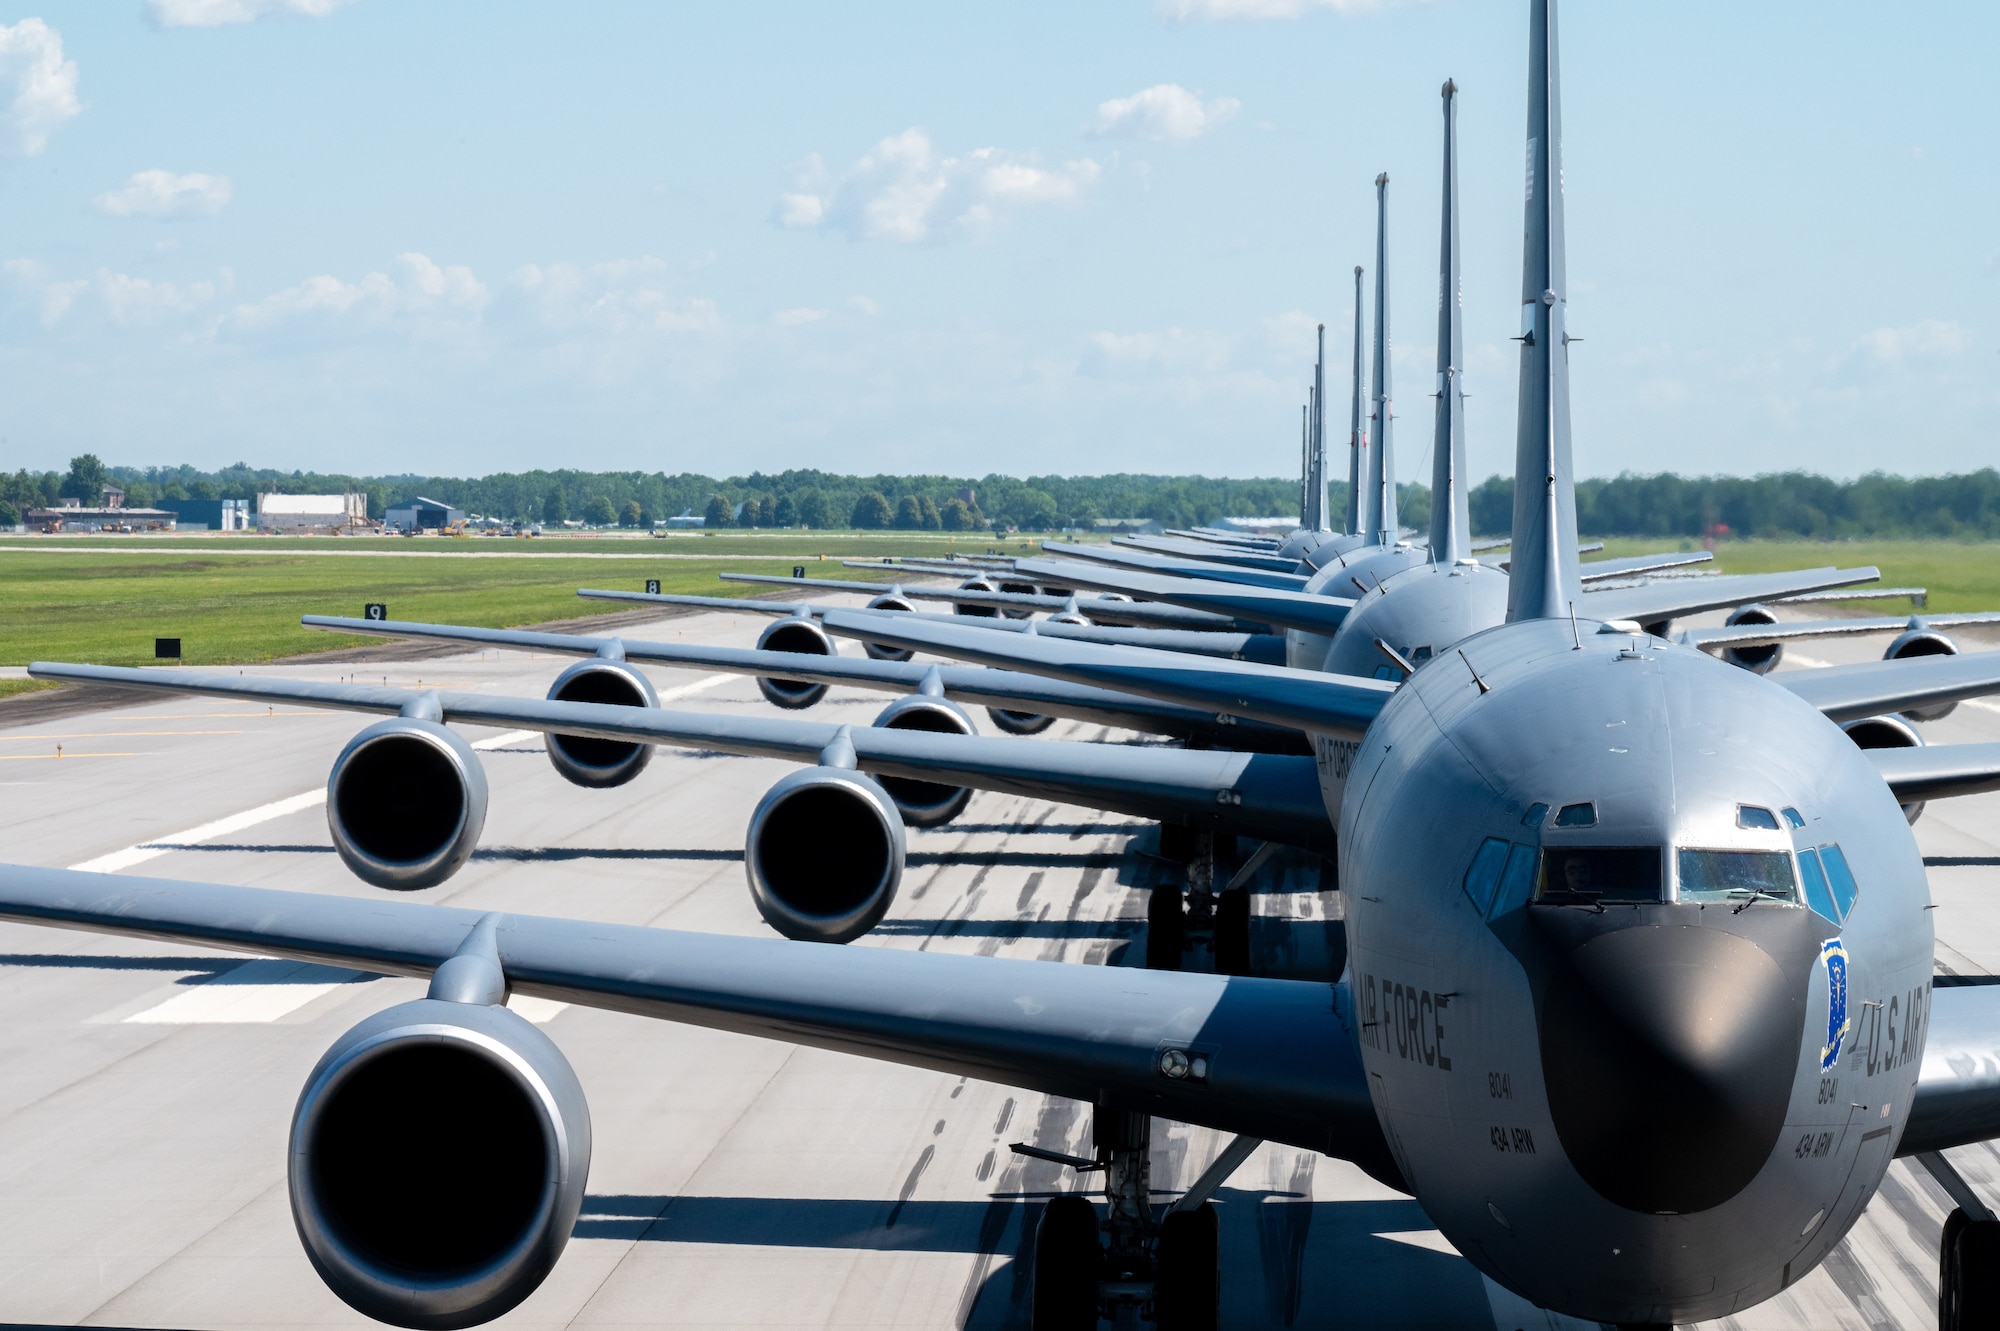 Eight KC-135R Stratotankers in a single-file line, each with their front-end visible in the photograph.